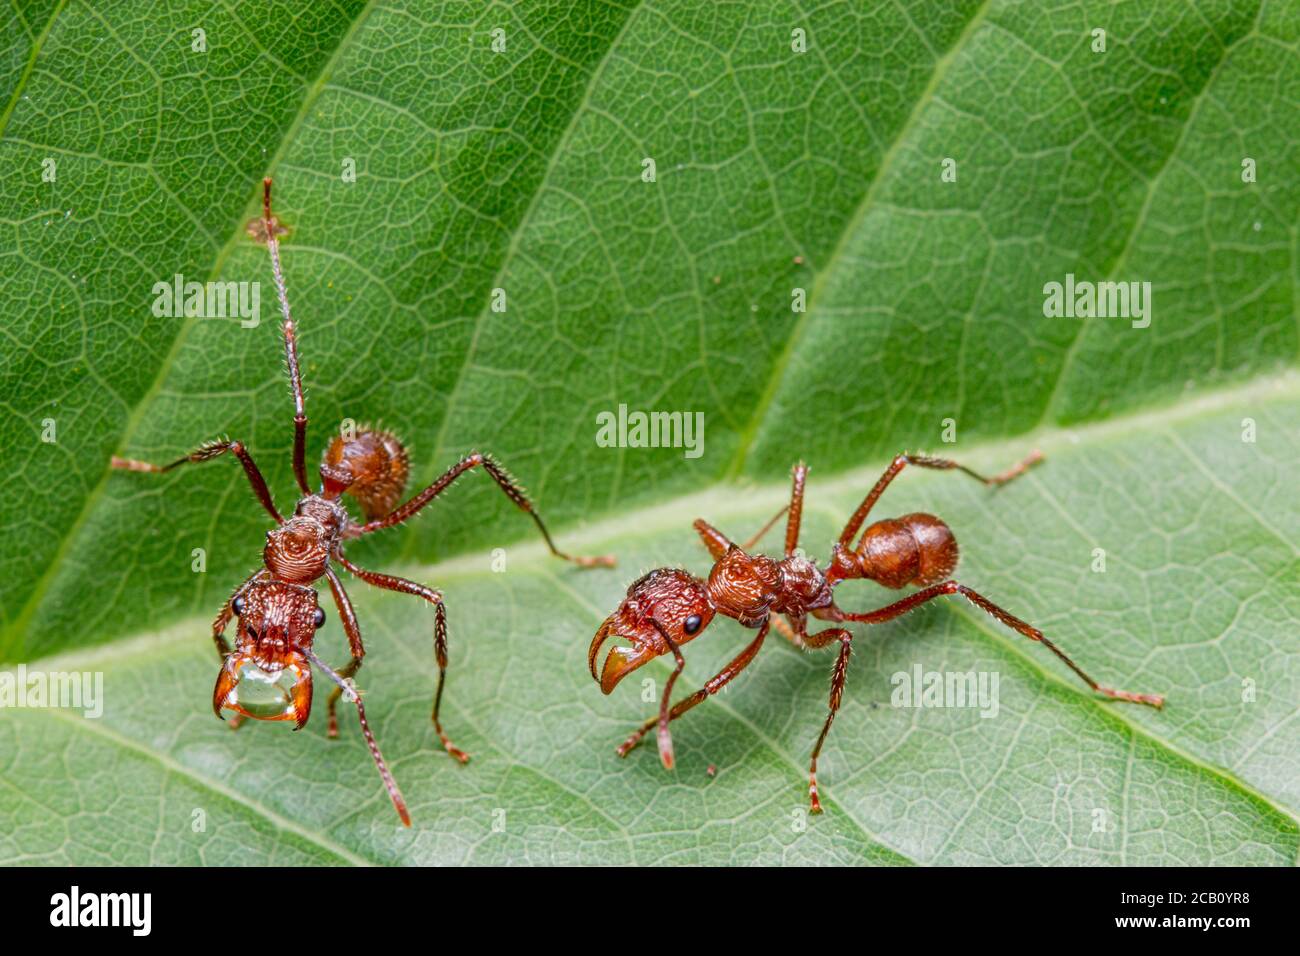 Ectatomma tuberculatum is a ant can be a common and readily observable constituent of ant communities in favorable habitat. Ibague, Tolima, Colombia Stock Photo